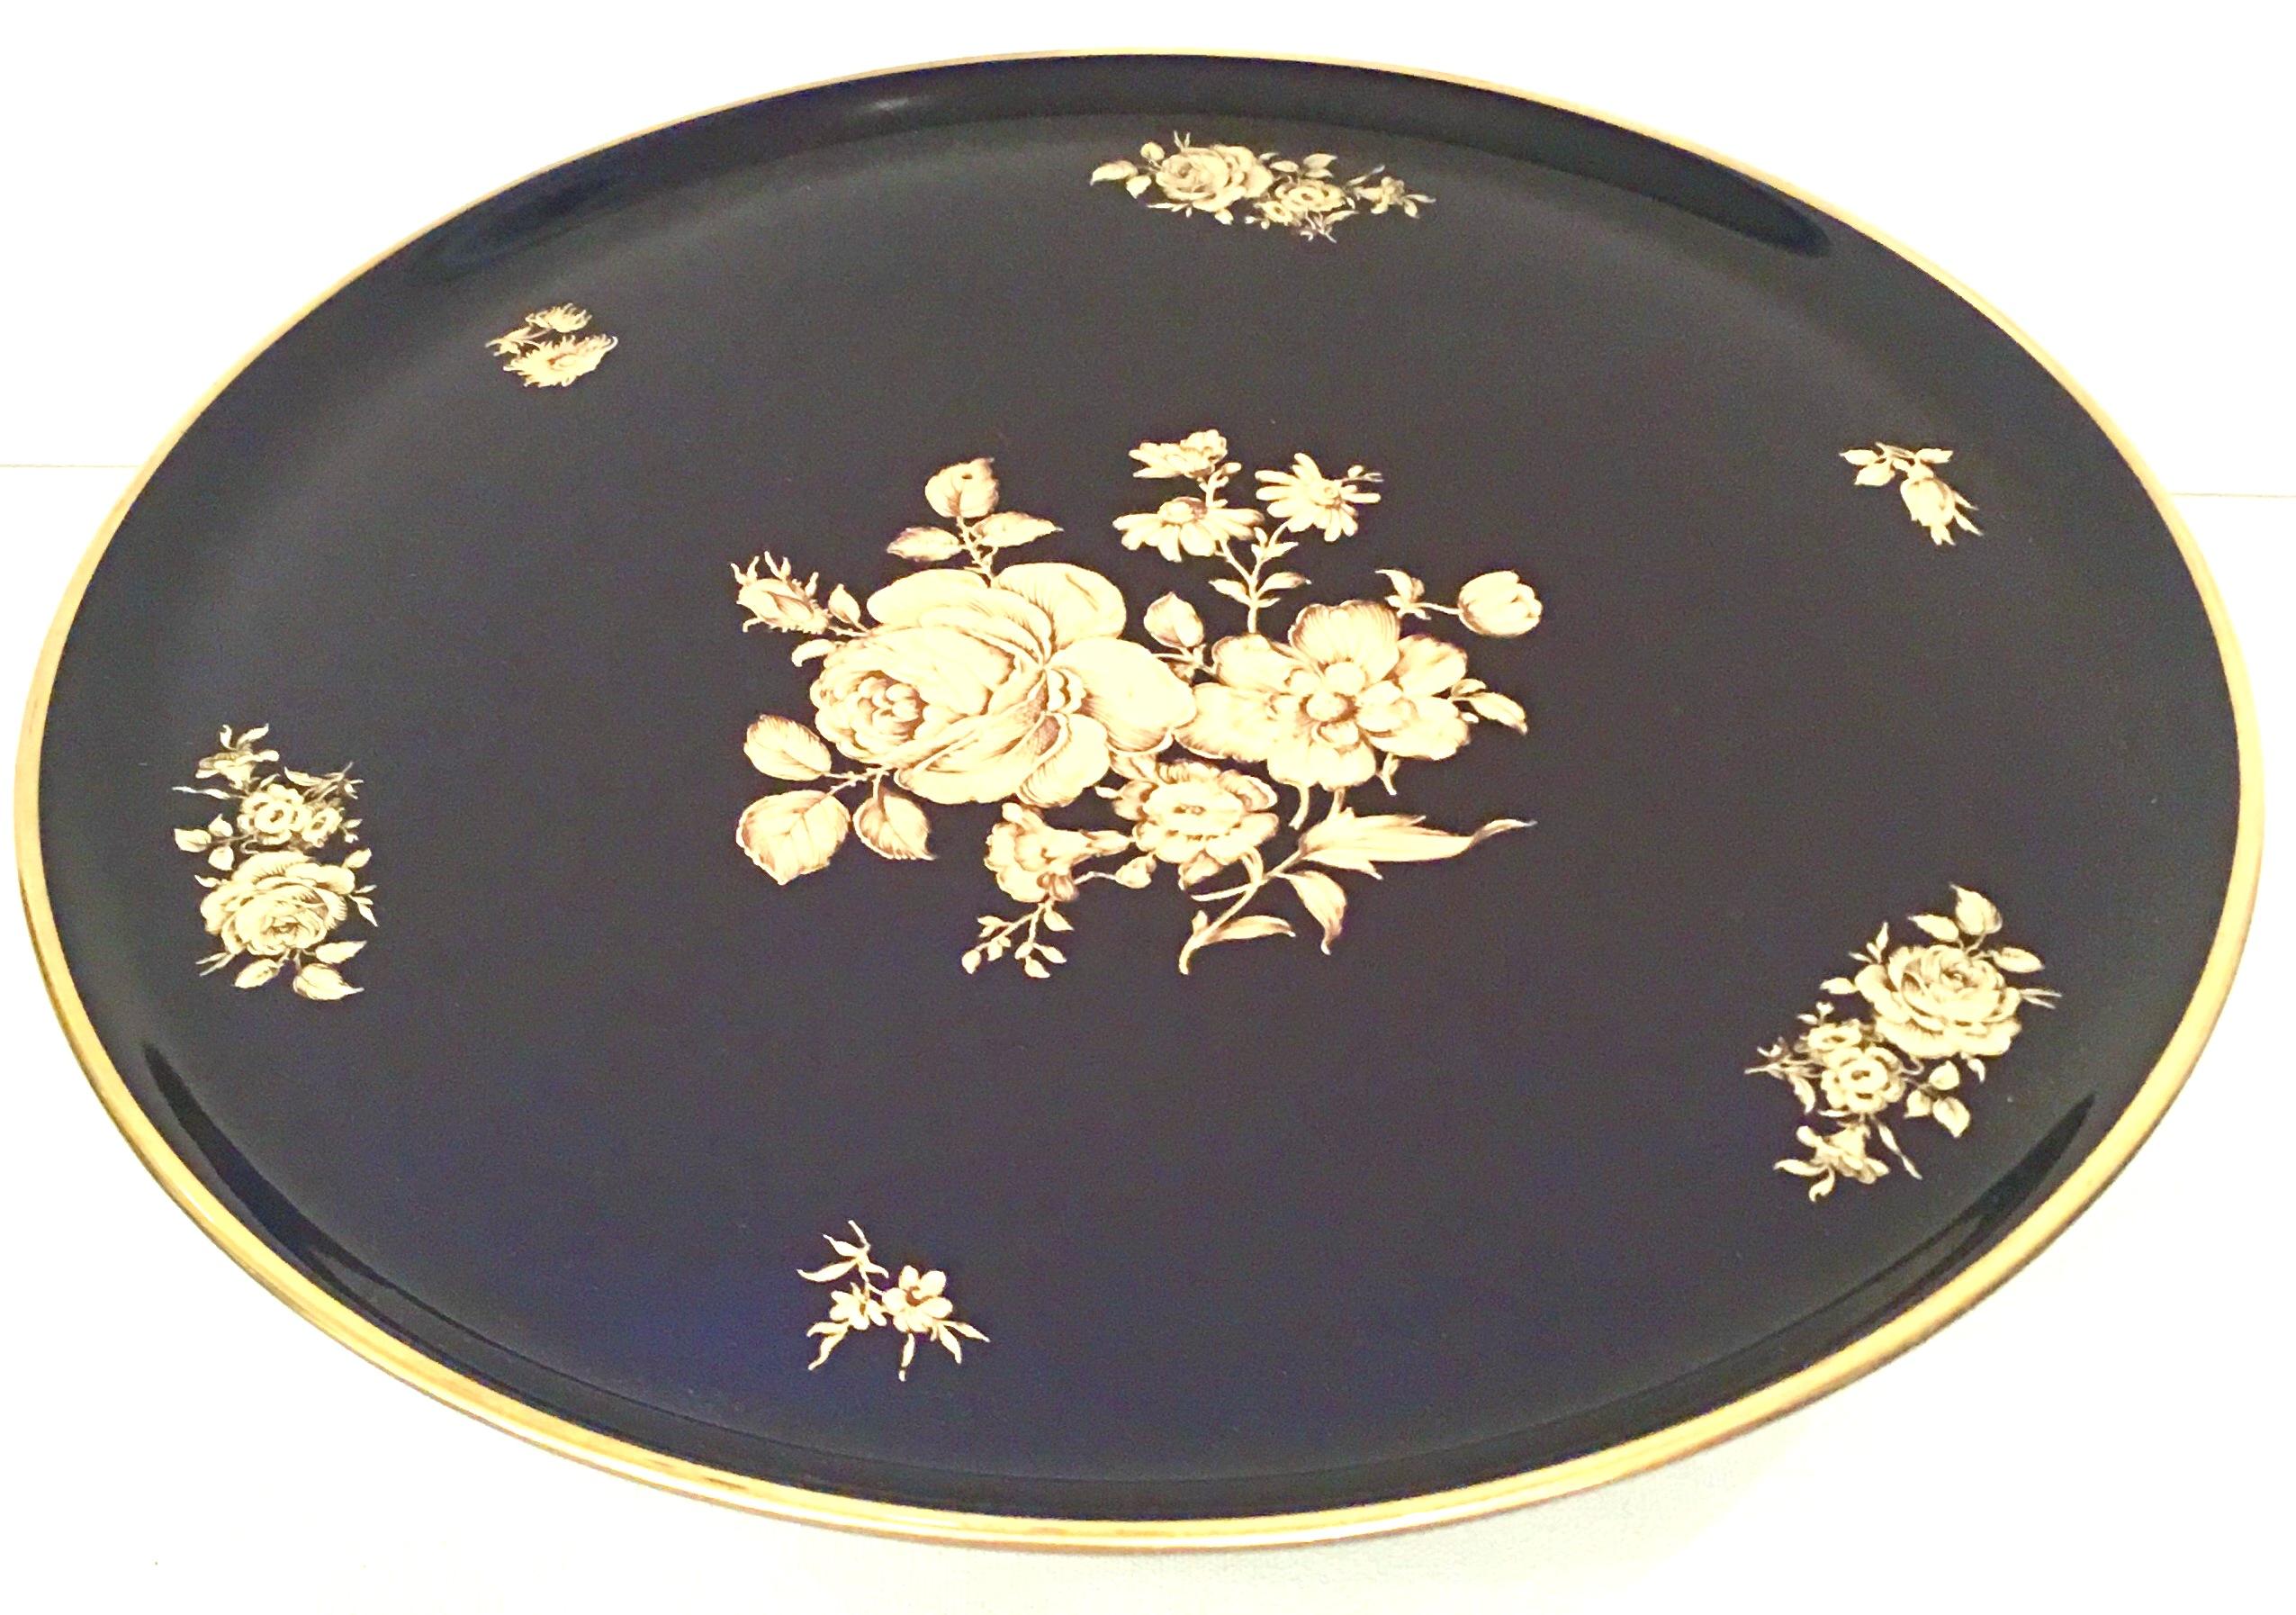 20th Century German Porcelain & 22-Karat Gold Footed Cake Platter By, Bareuther For Sale 1